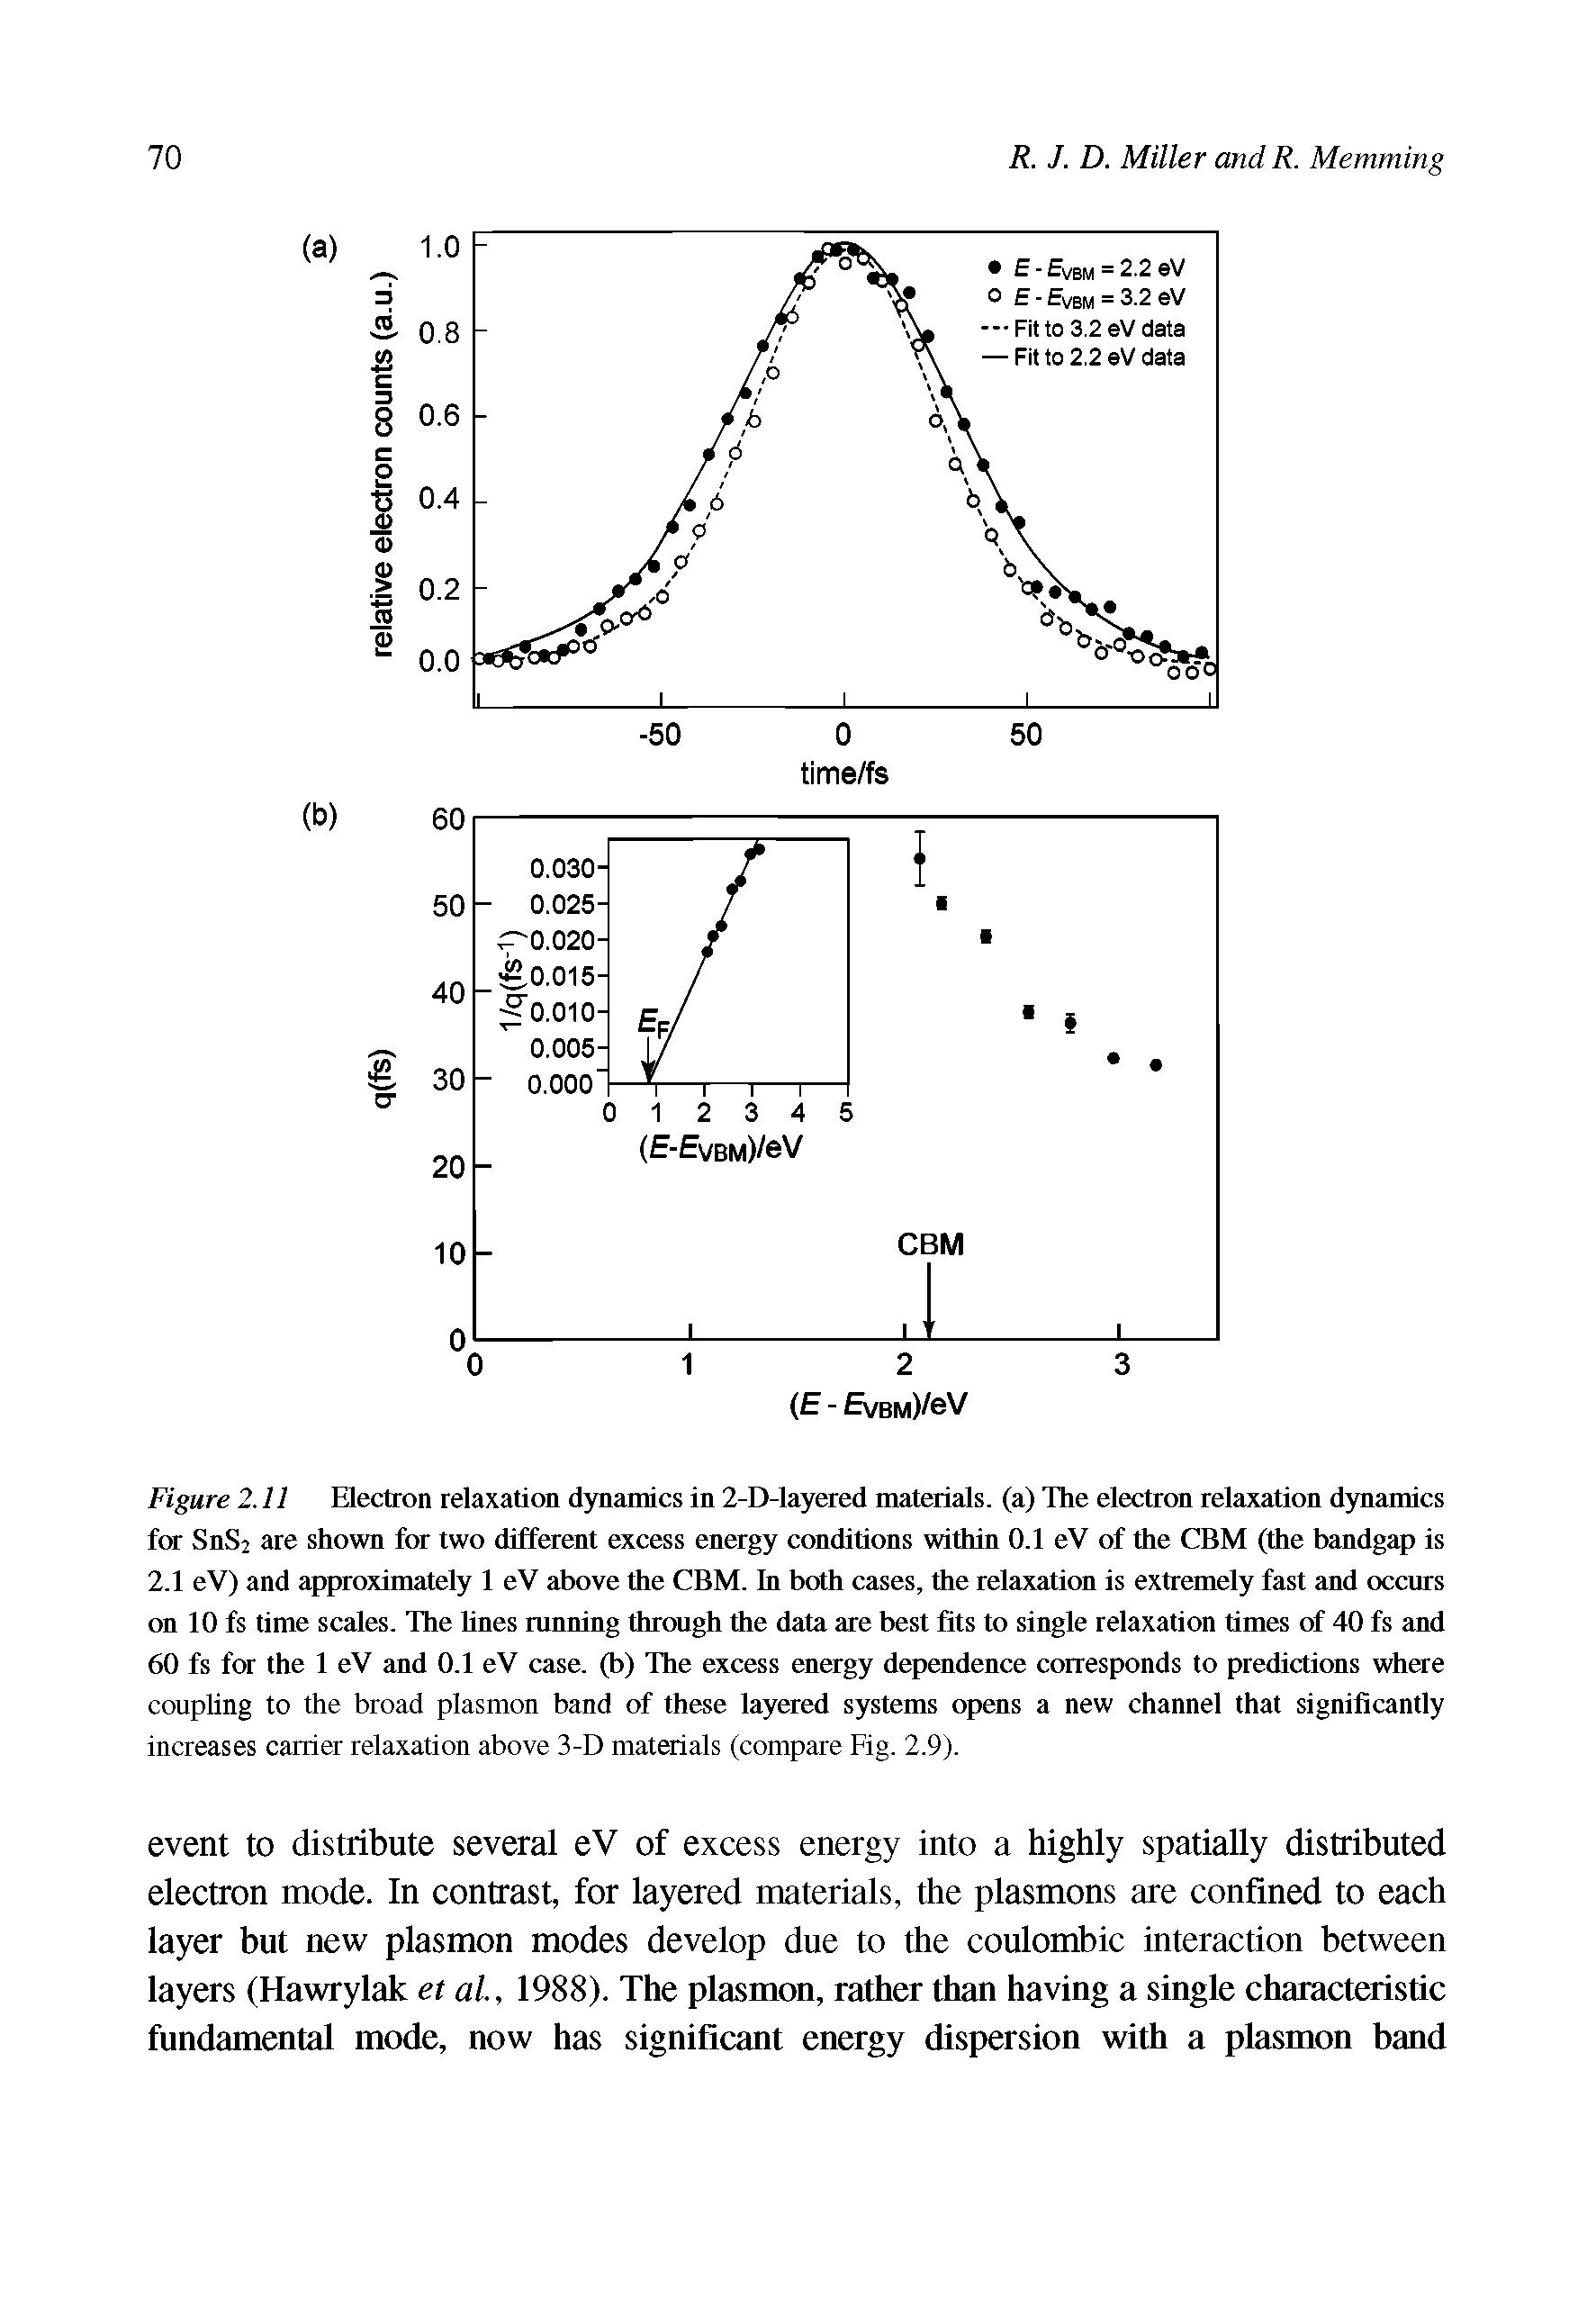 Figure 2.11 Electron relaxation dynamics in 2-D-layered materials, (a) The electron relaxation dynamics for SnSi are shown for two different excess energy conditions within 0.1 eV of the CBM (the bandgap is 2.1 eV) and approximately 1 eV above the CBM. In both cases, the relaxation is extremely fast and occurs on 10 fs time scales. The Unes running through the data are best fits to single relaxation times of 40 fs and 60 fs for the 1 eV and 0.1 eV case, (b) The excess energy dependence corresponds to predictions where coupling to the broad plasmon band of these layered systems opens a new channel that significantly increases carrier relaxation above 3-D materials (compare Fig. 2.9).